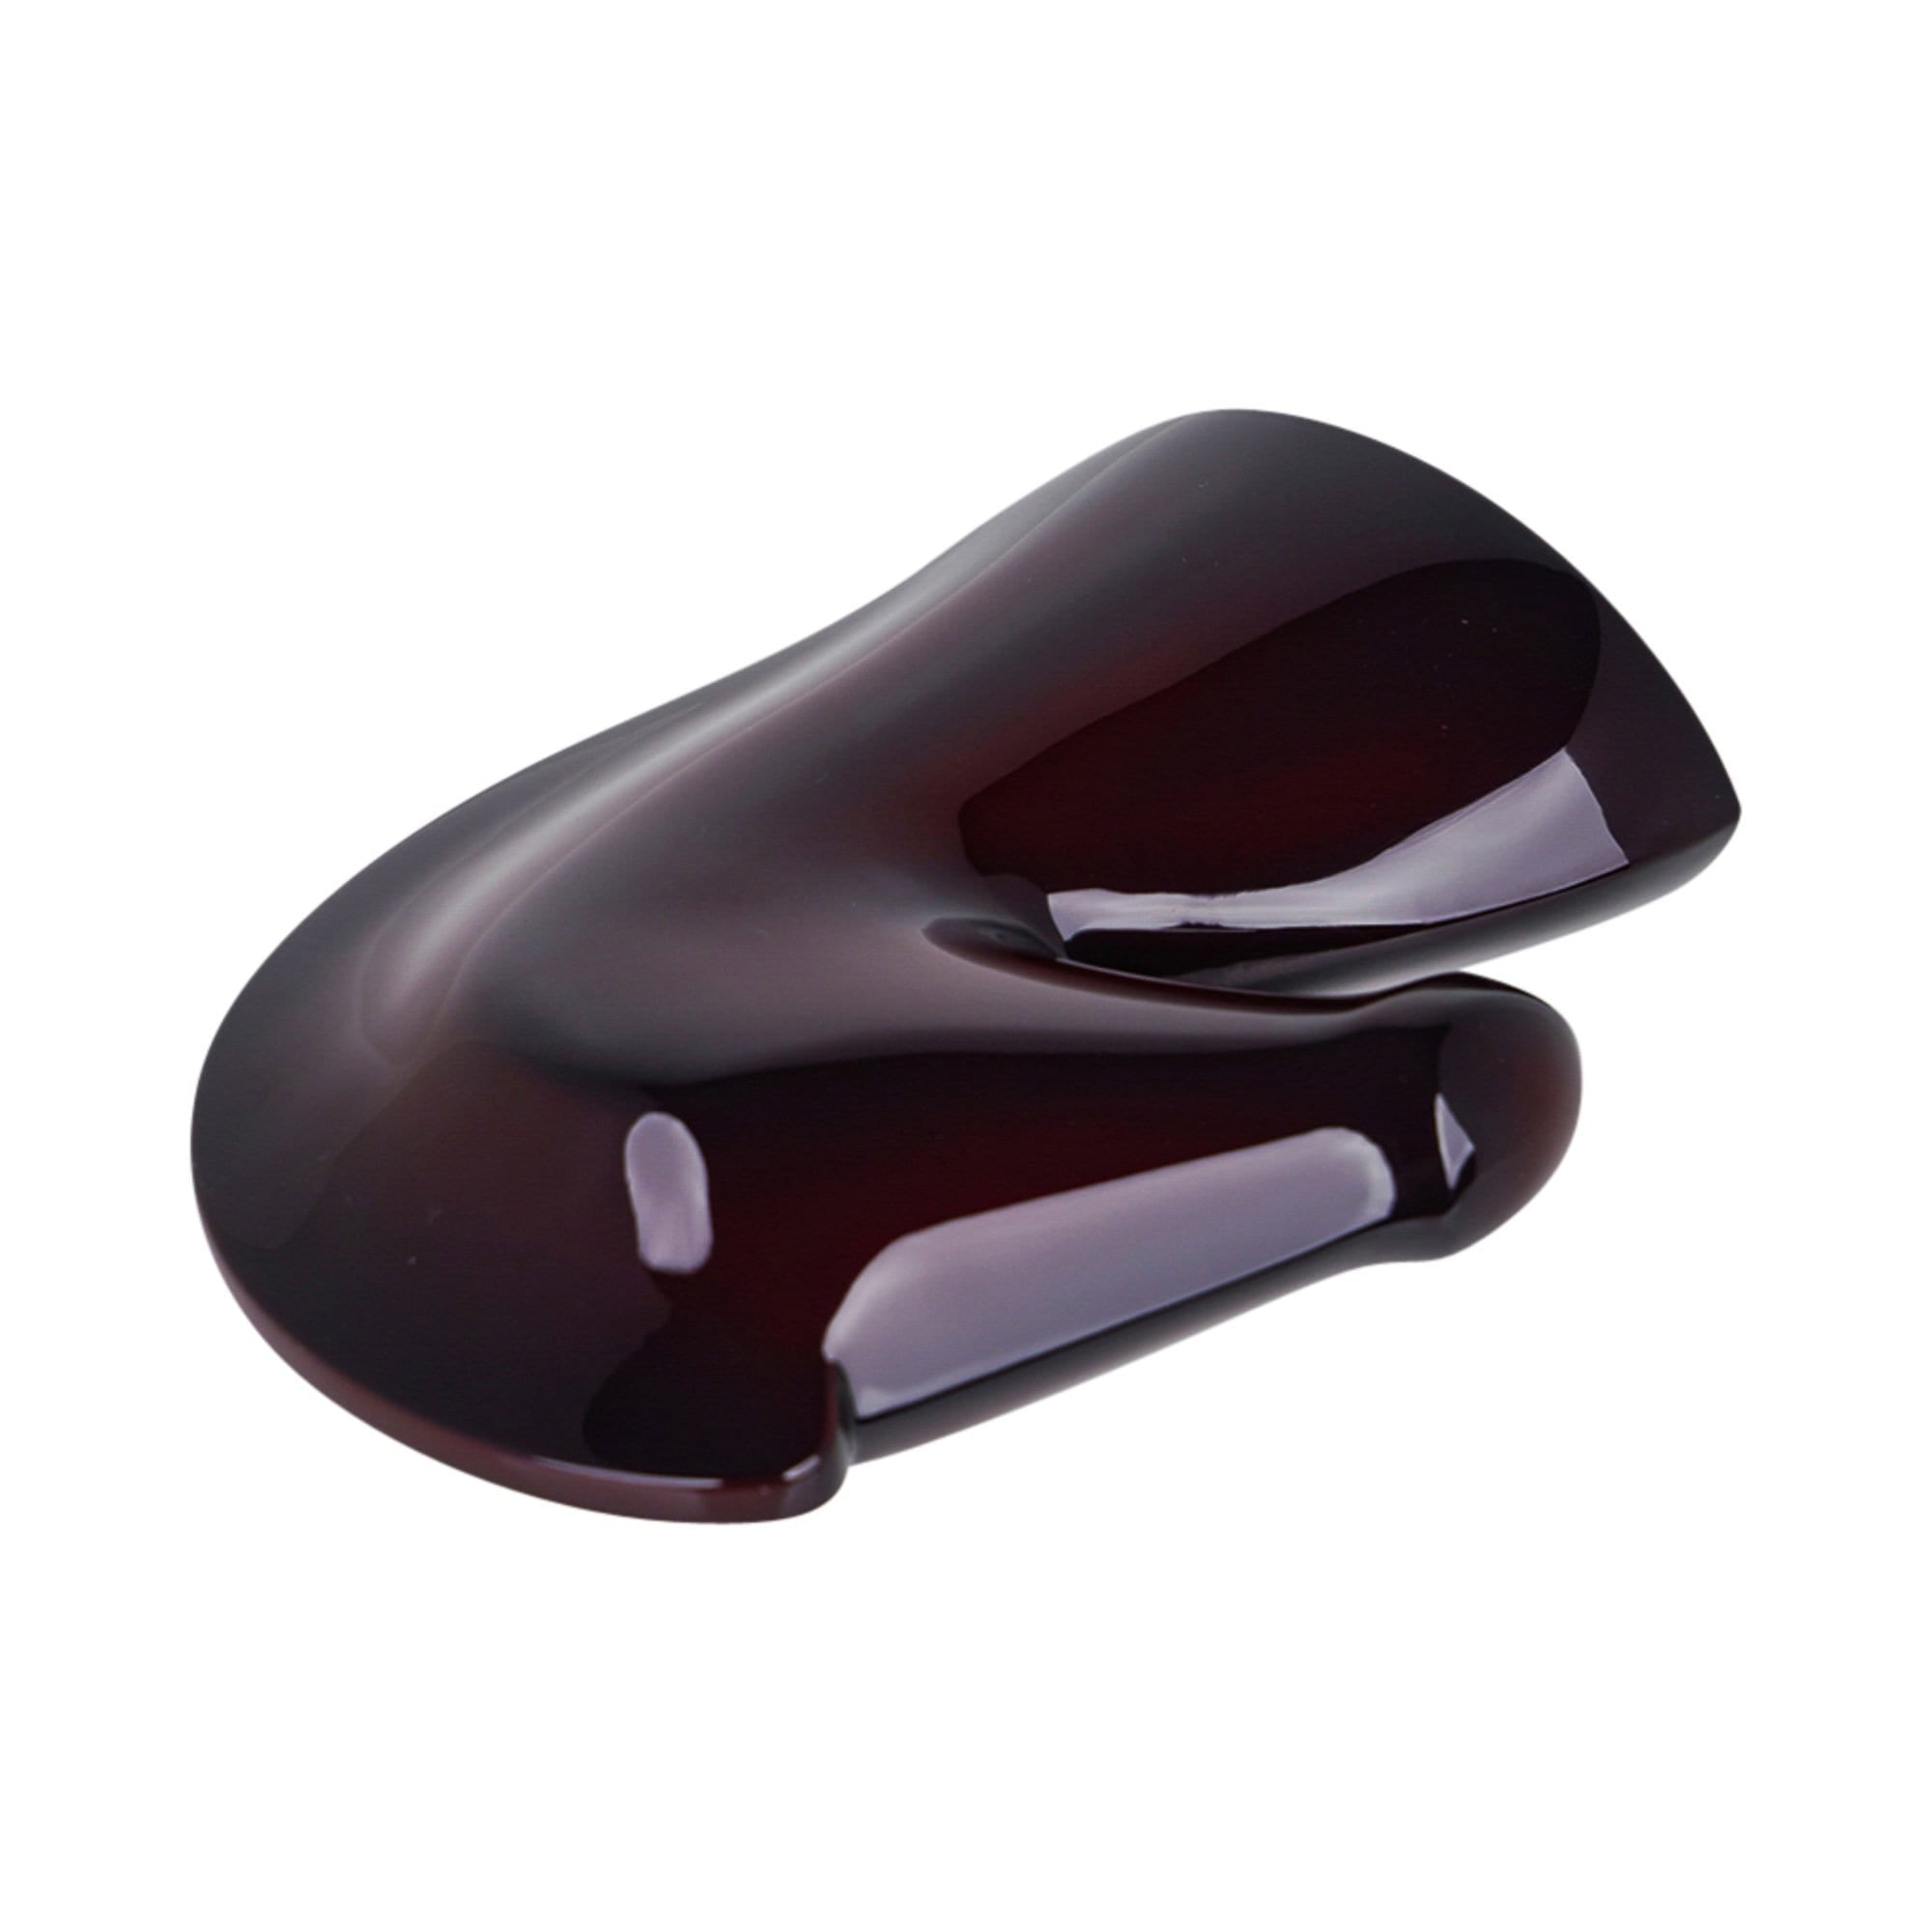 Hermes Samarcande Paperweight Aubergine Lacquered Wood New/ Box